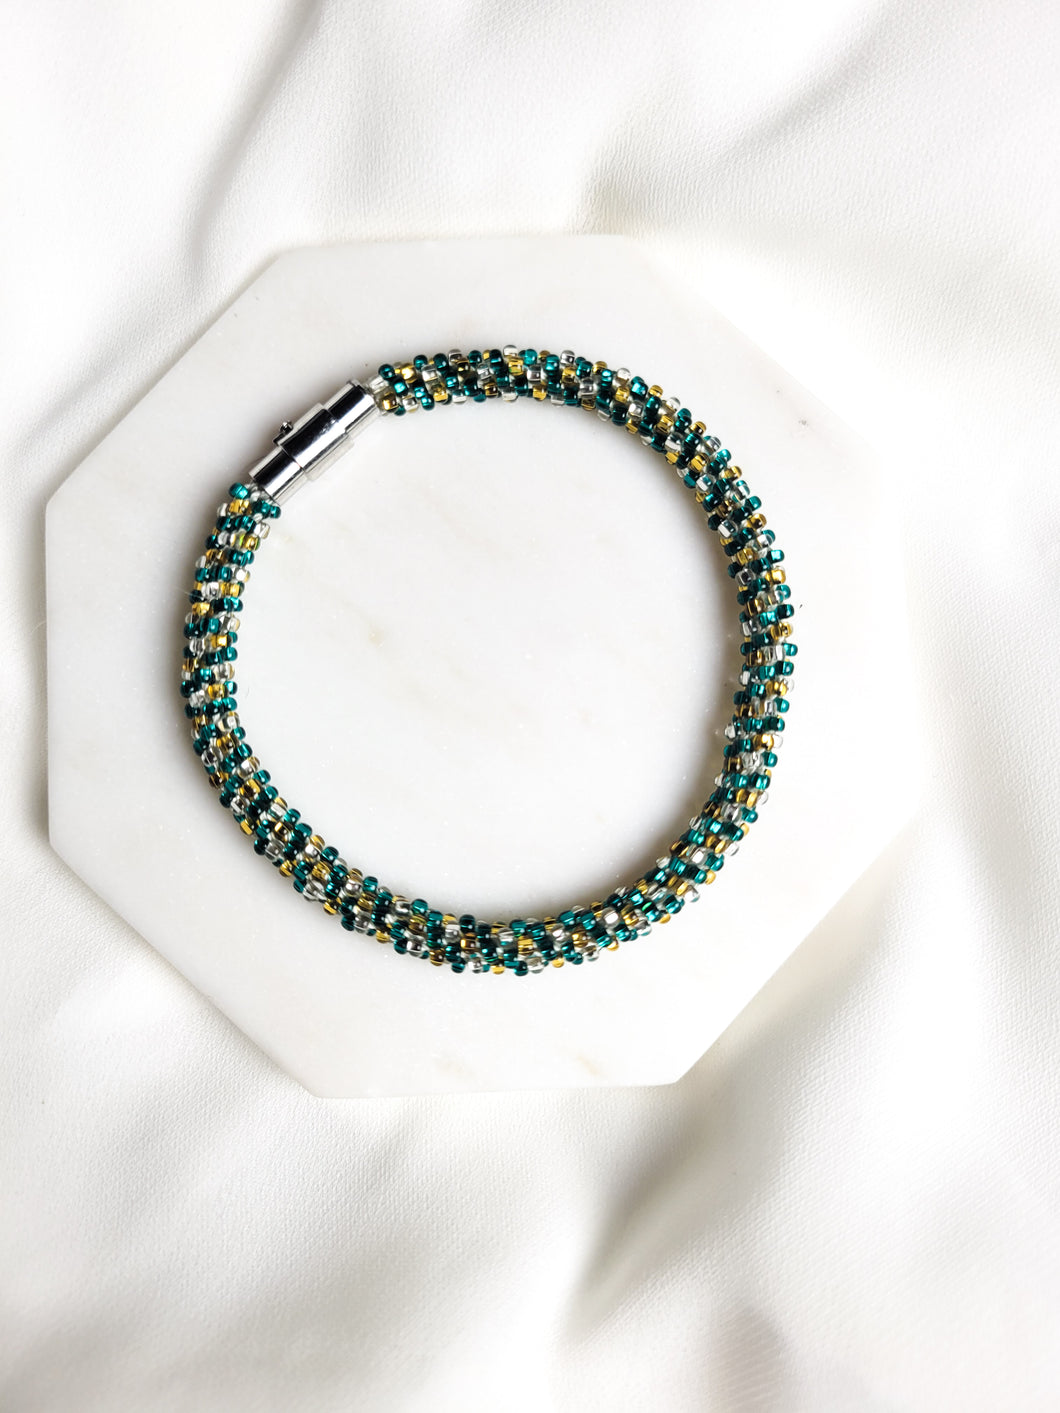 Teal Silver and Gold Kumihimo Bracelet